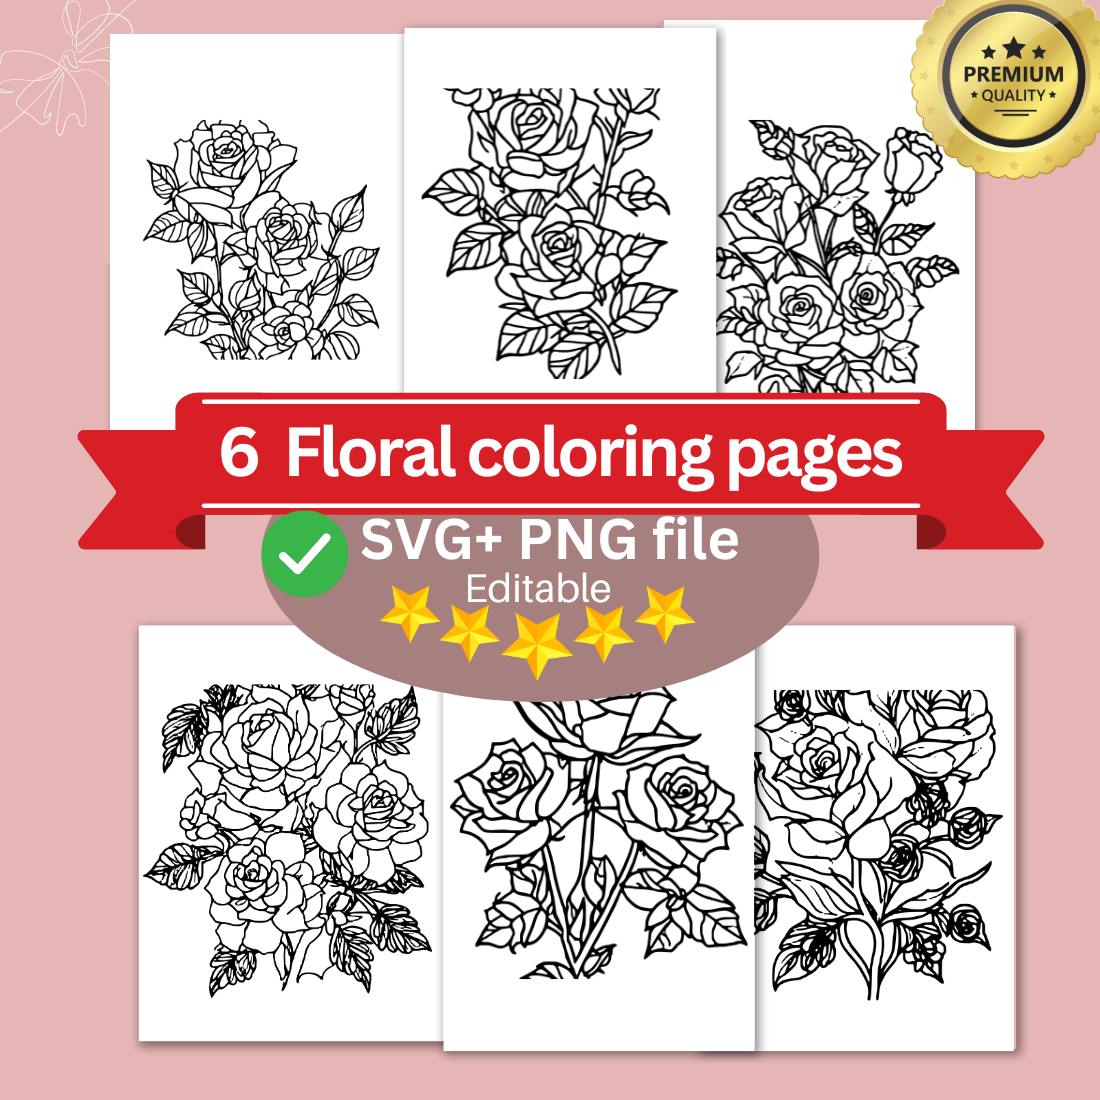 6 Rose Drawing Floral Coloring Pages with butterflies For Adults (SVG and PNG) cover image.